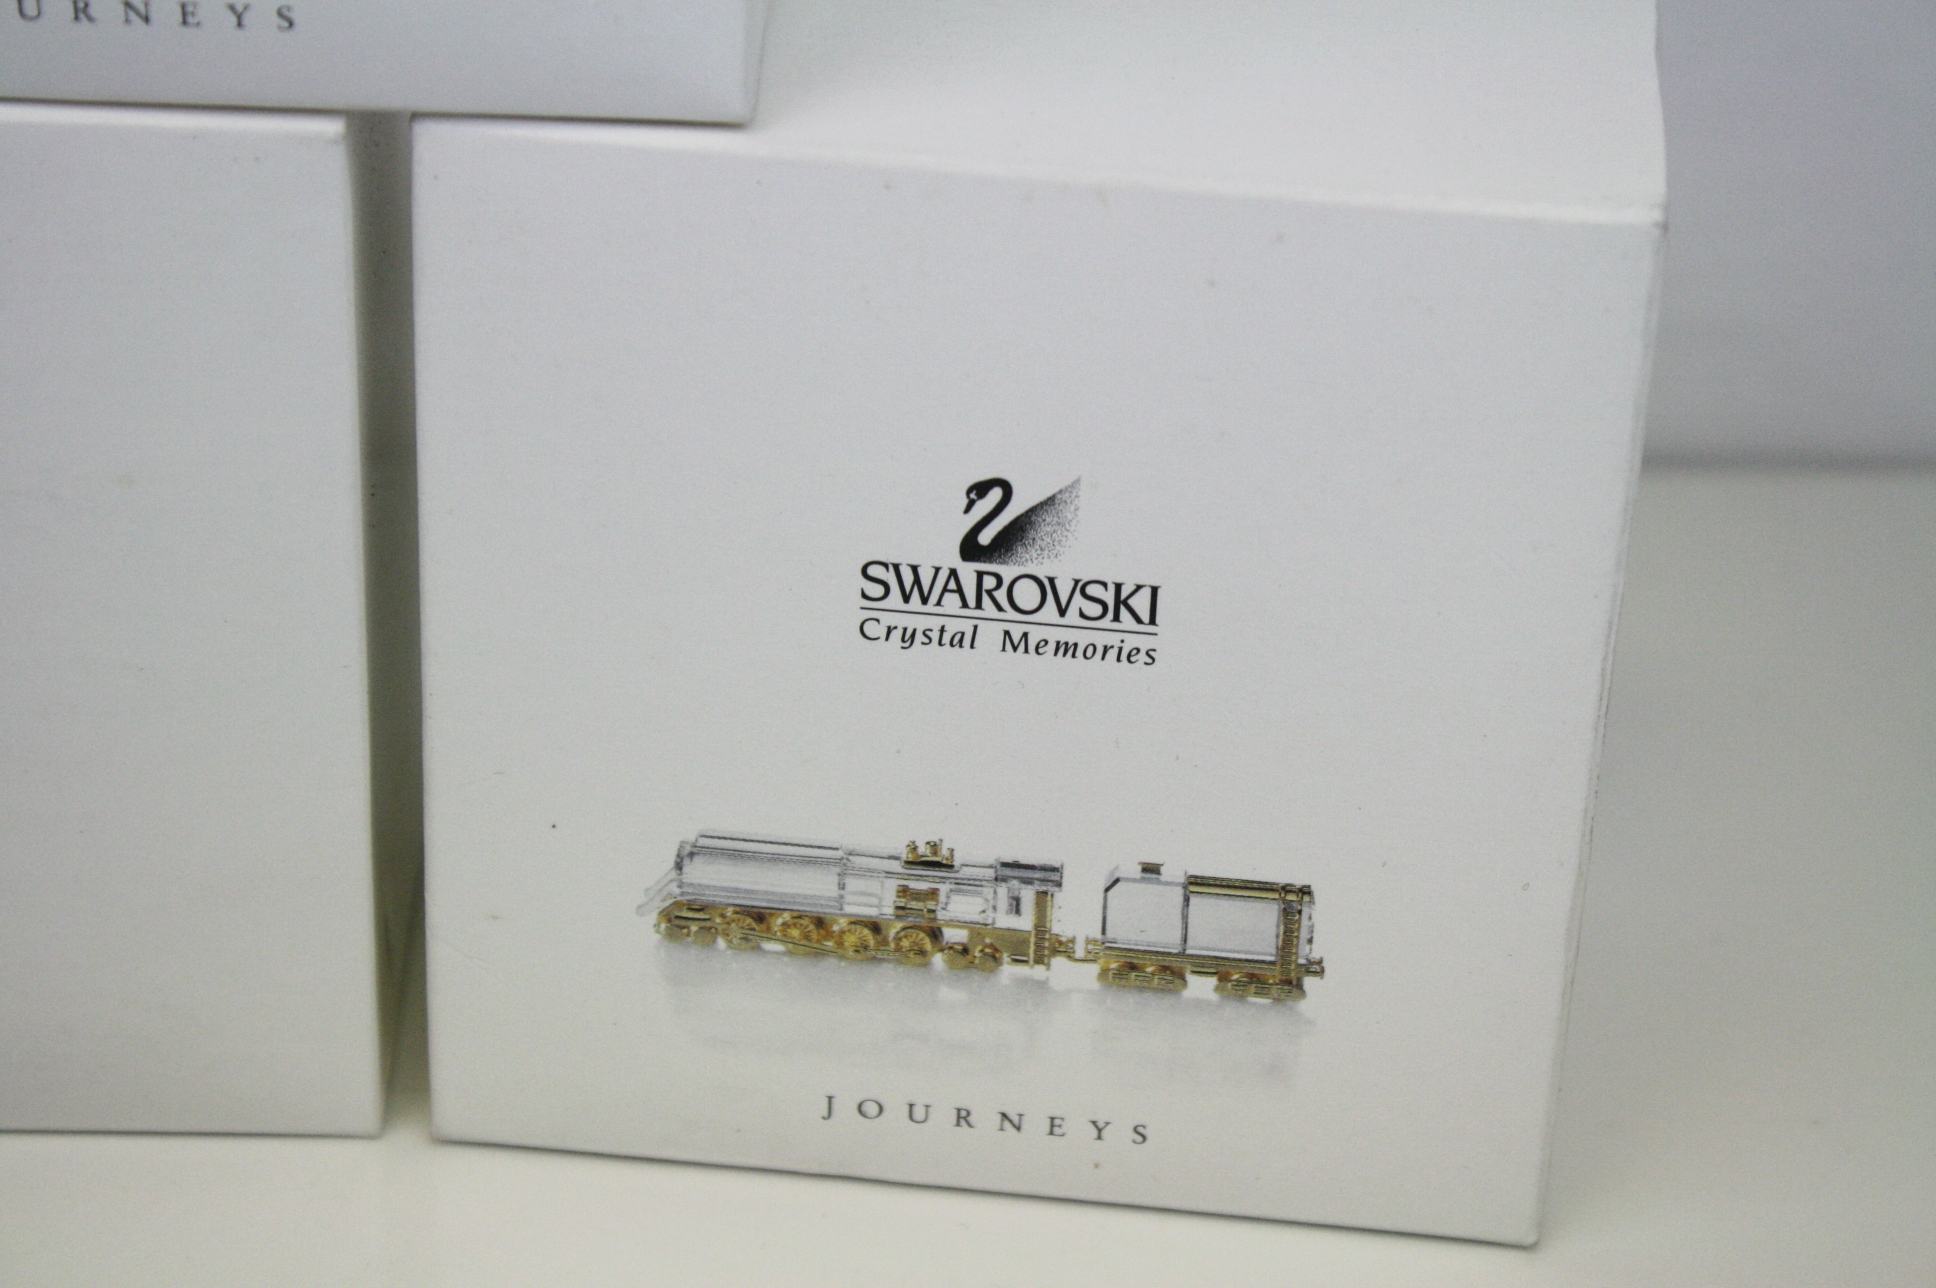 Collection of six Swarovski crystal memories 'Journeys' in gold with original boxes - Image 8 of 8